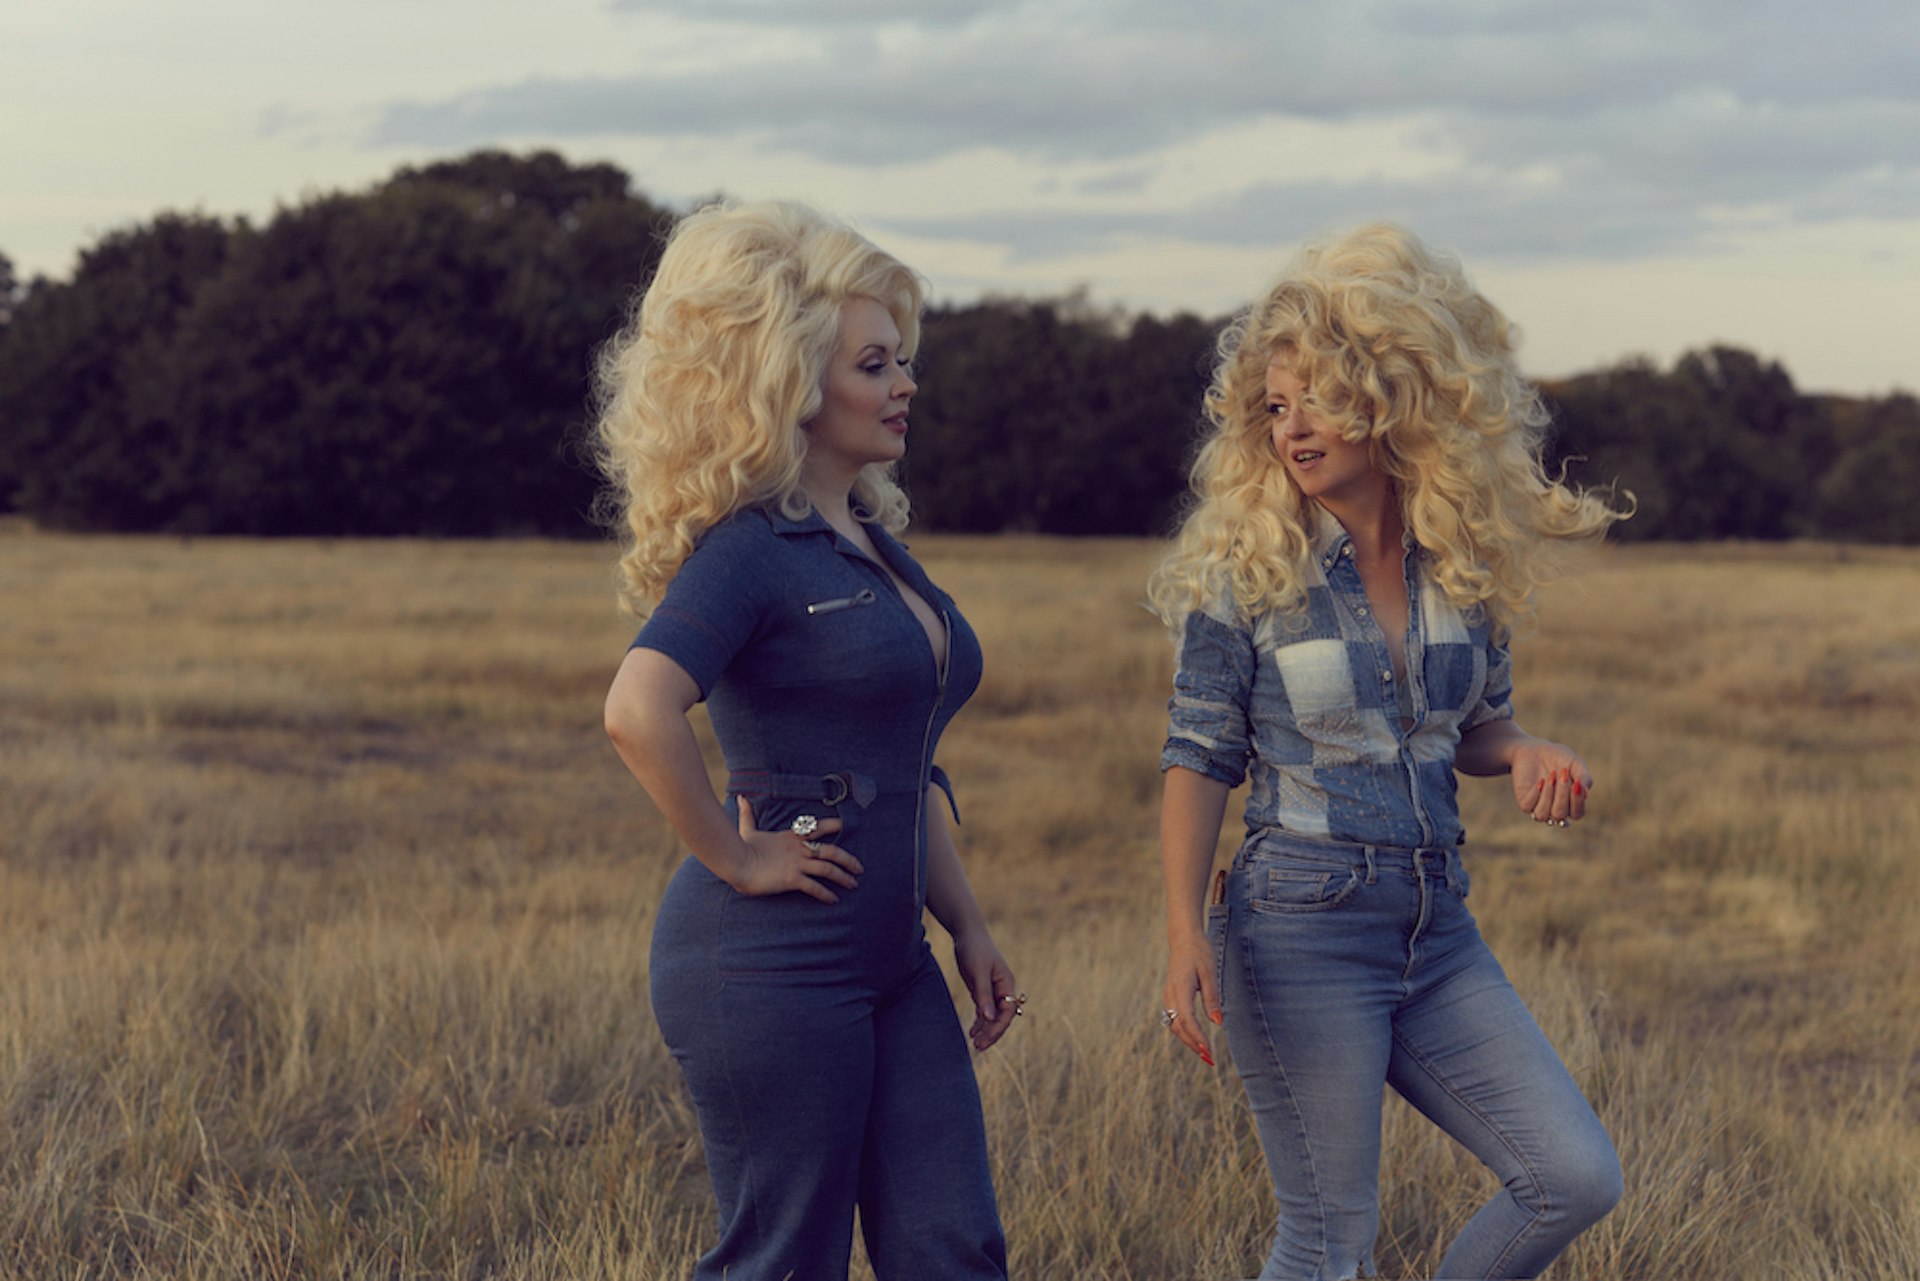 One photographer's love letter to the power of Dolly Parton